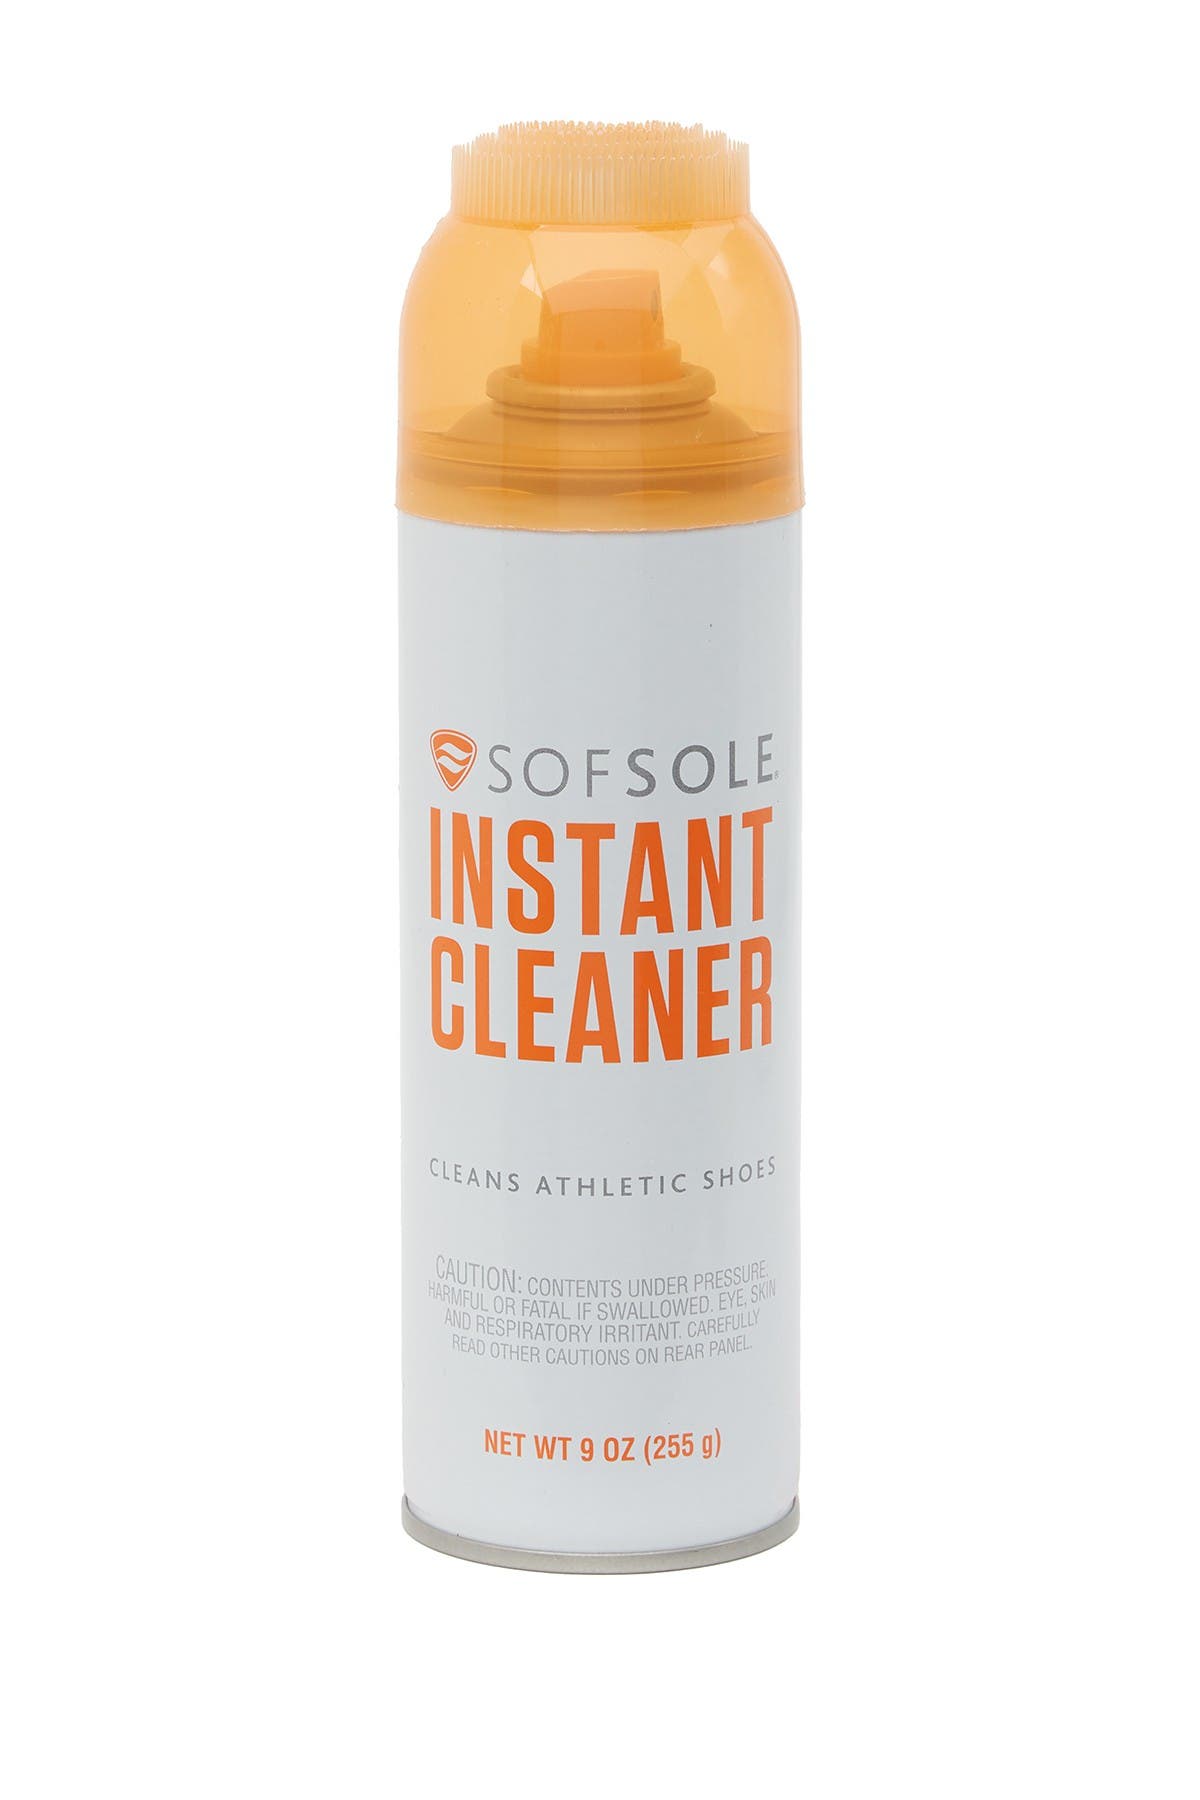 how to use sof sole instant cleaner